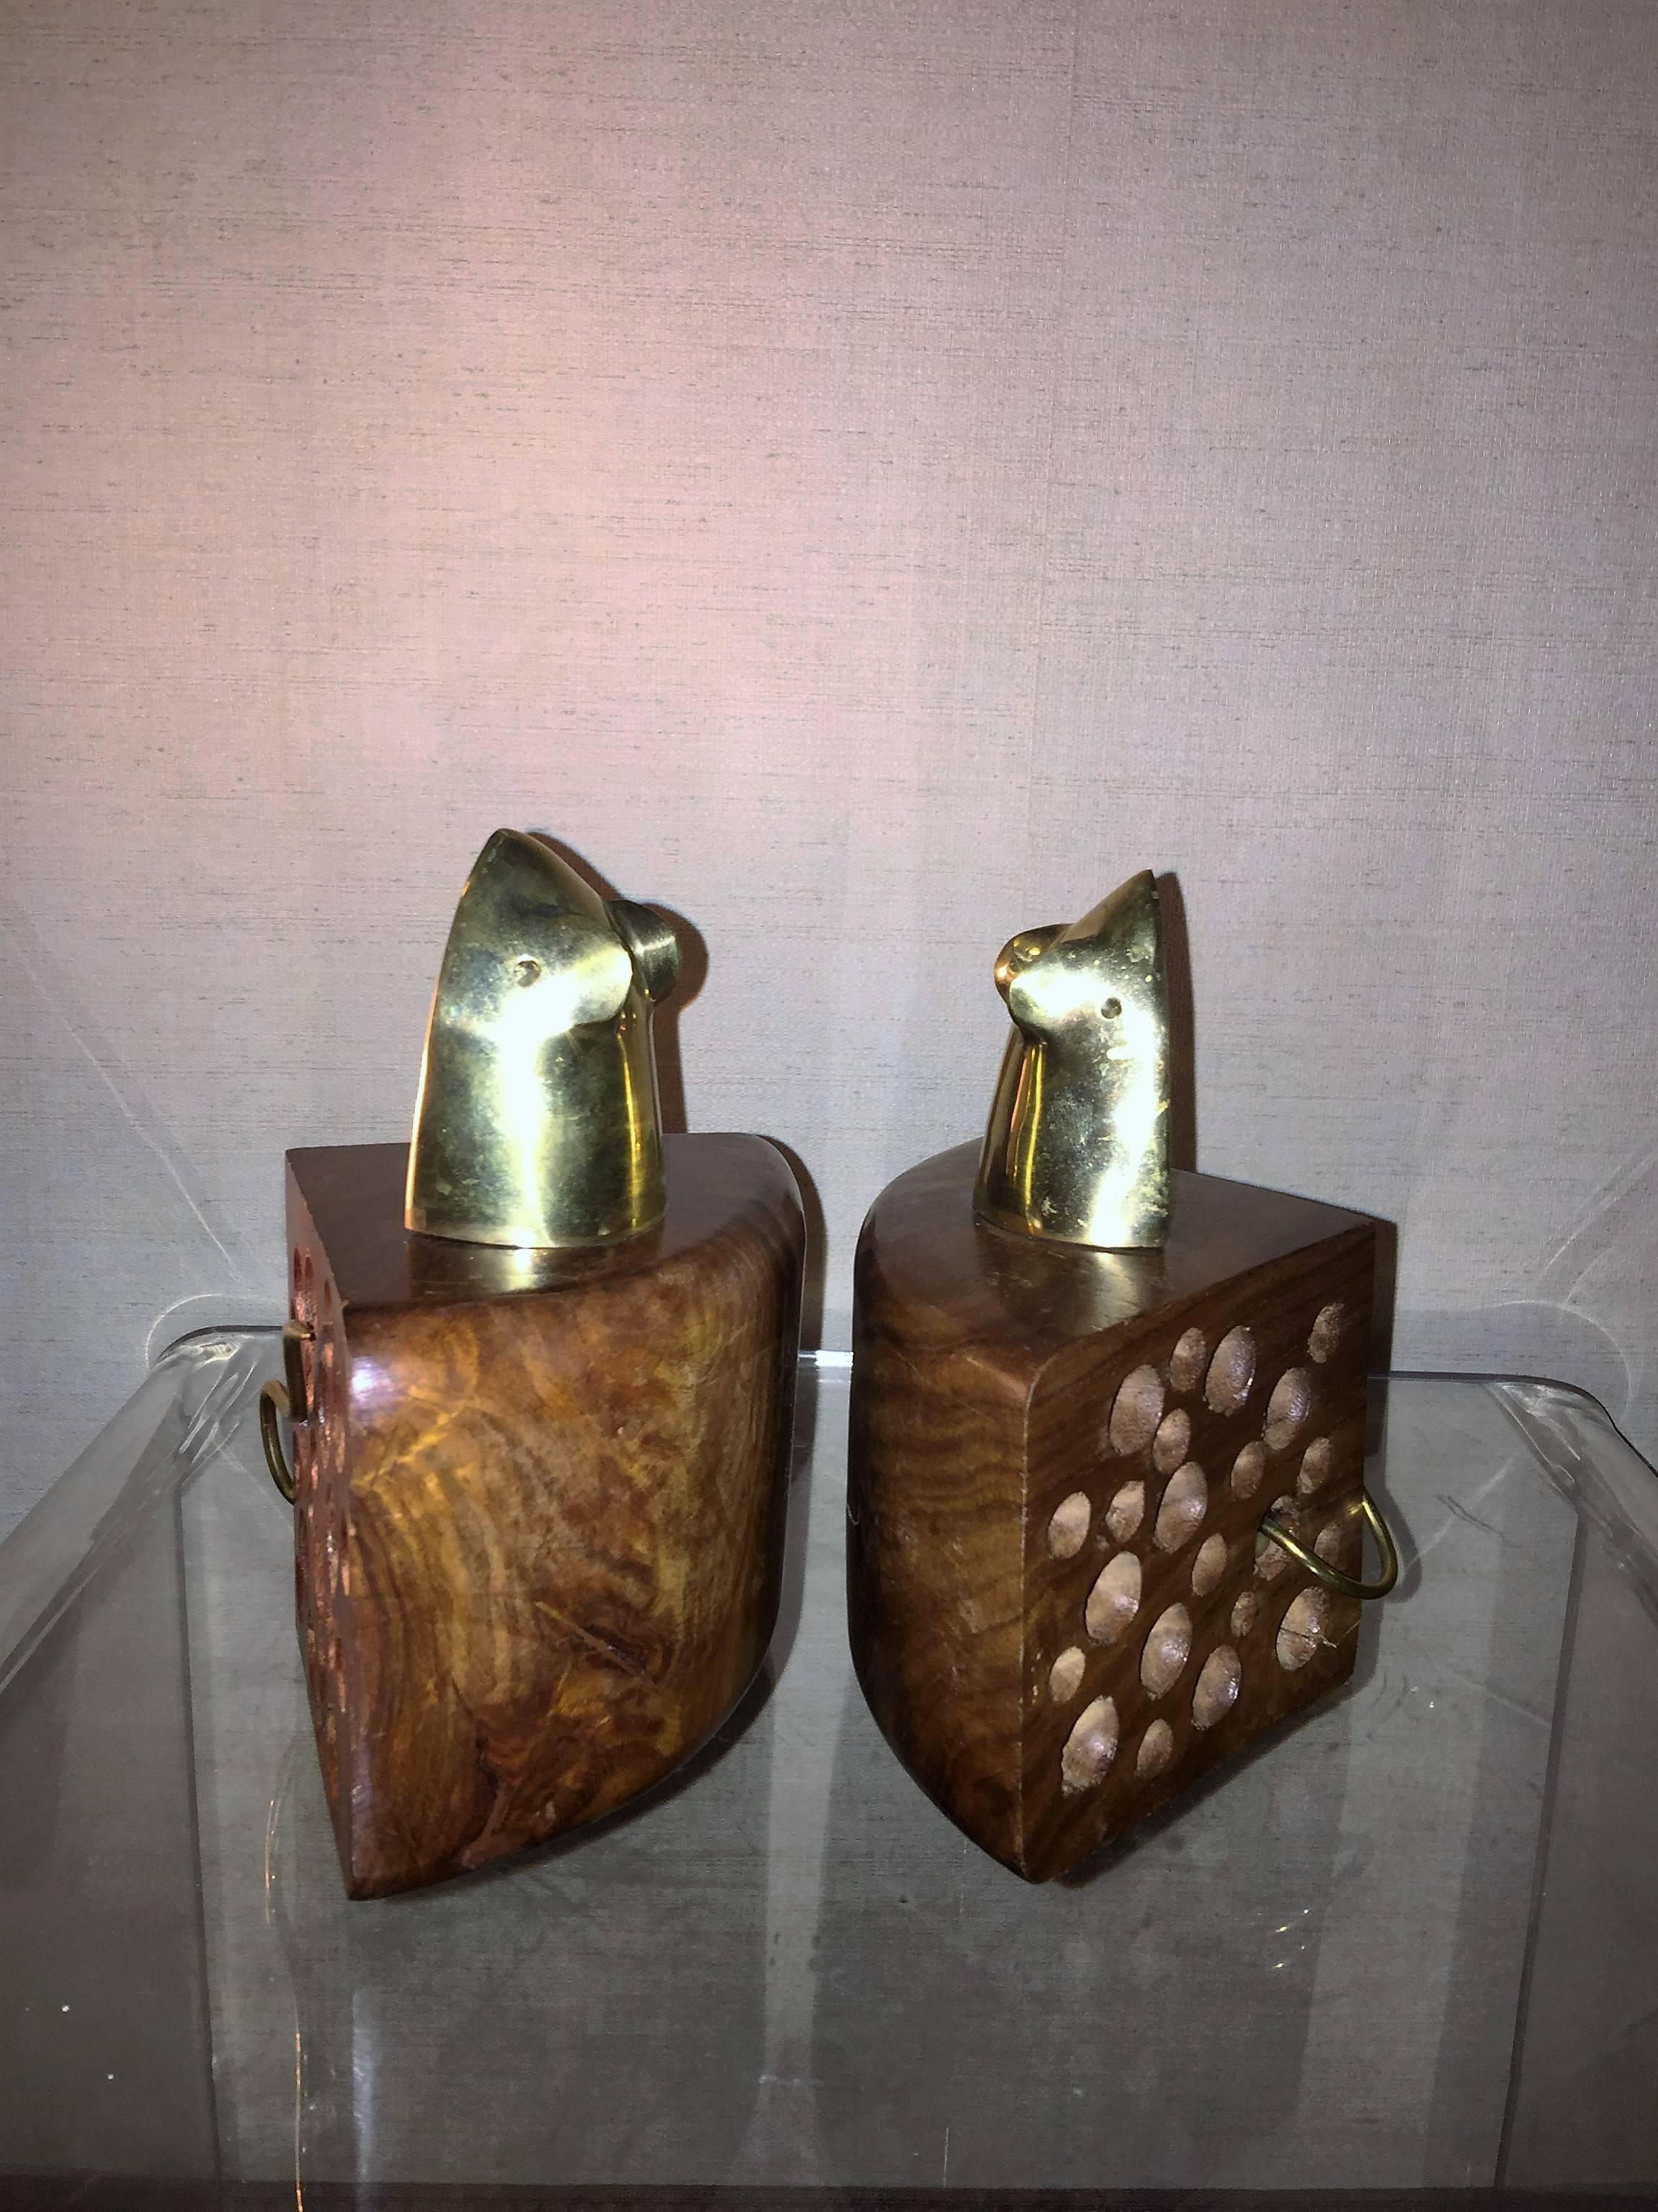 Adorable and well-made brass mouse and carved walnut cheese wedge bookends. Each with a stylized brass mouse with trailing tail poking out of a wedge of cheese hand-carved walnut block of cheese is done beautifully with the modernist brass mouse